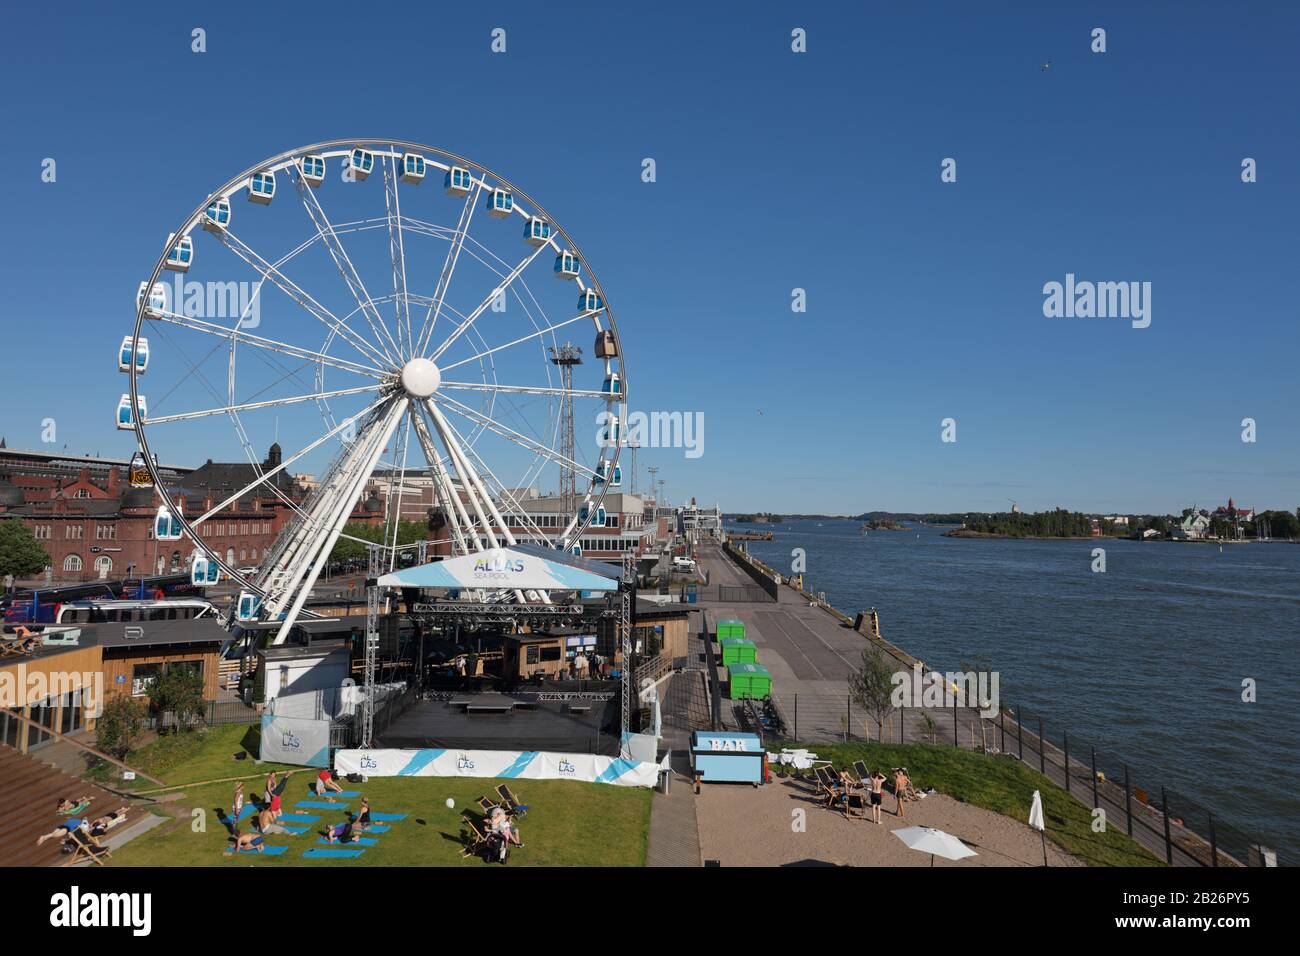 Ferris wheel at the South Harbour in Helsinki, Finland Stock Photo